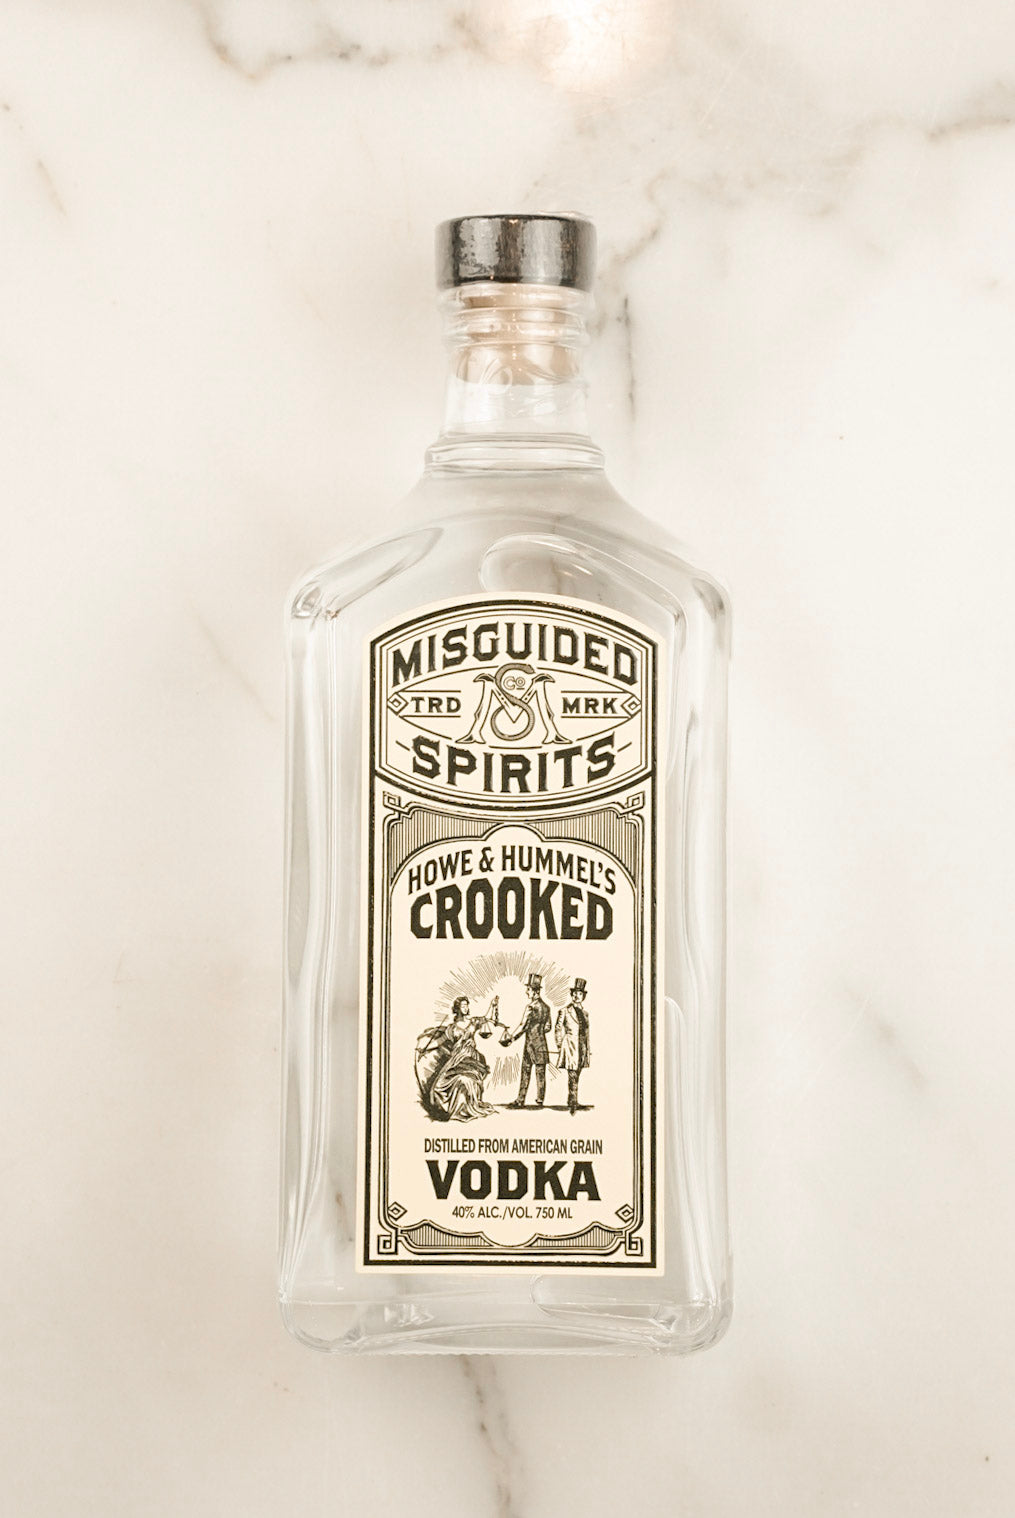 Misguided Spirits Crooked Vodka